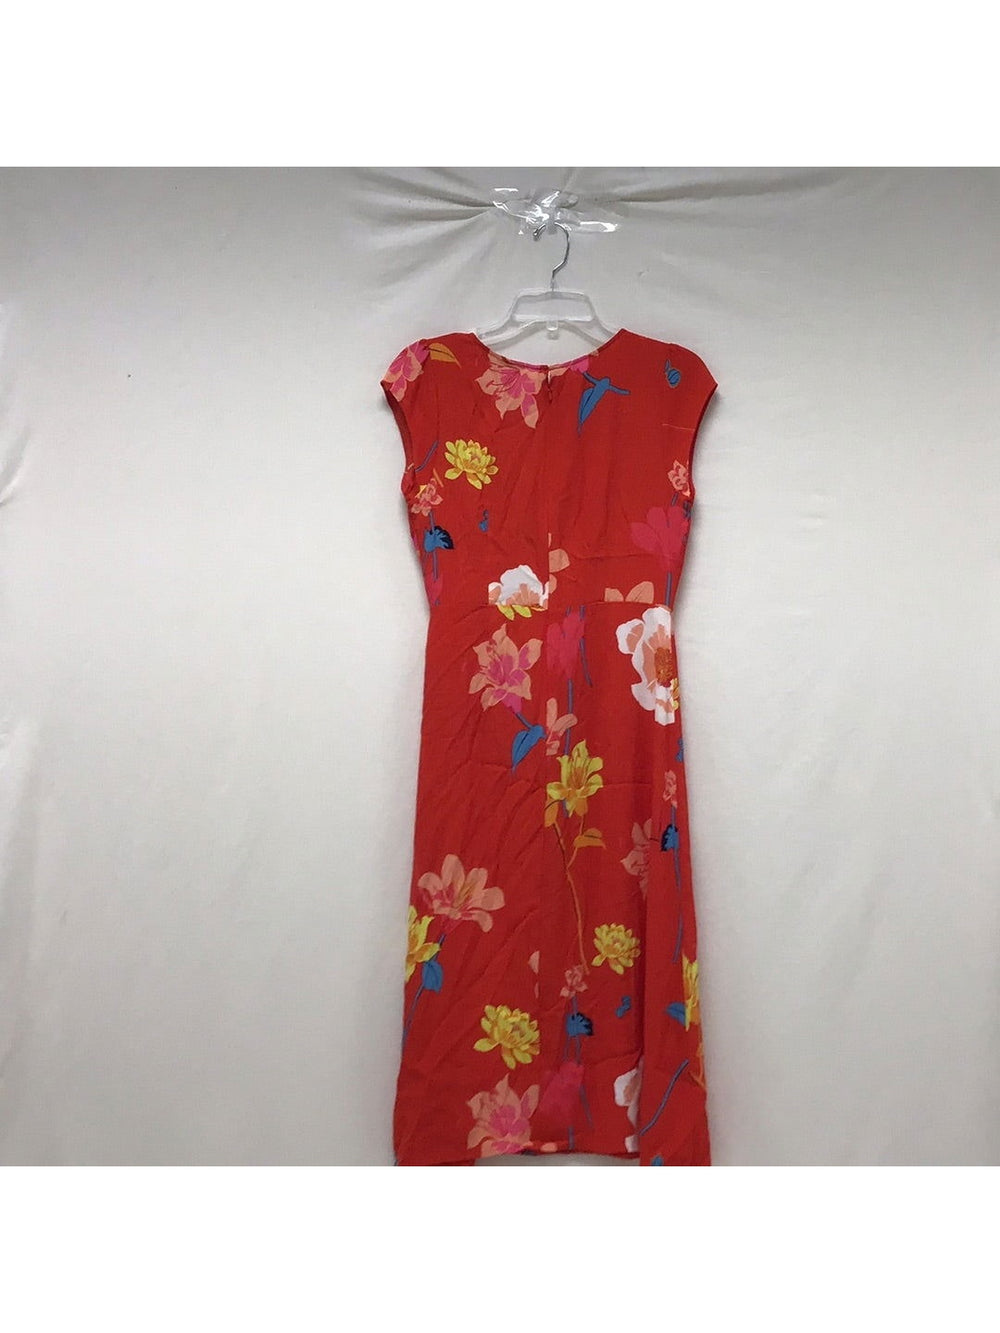 LOFT Ladies Size 2 Bright Orange Multi Colored Flower Long Length Dress - The Kennedy Collective Thrift - 